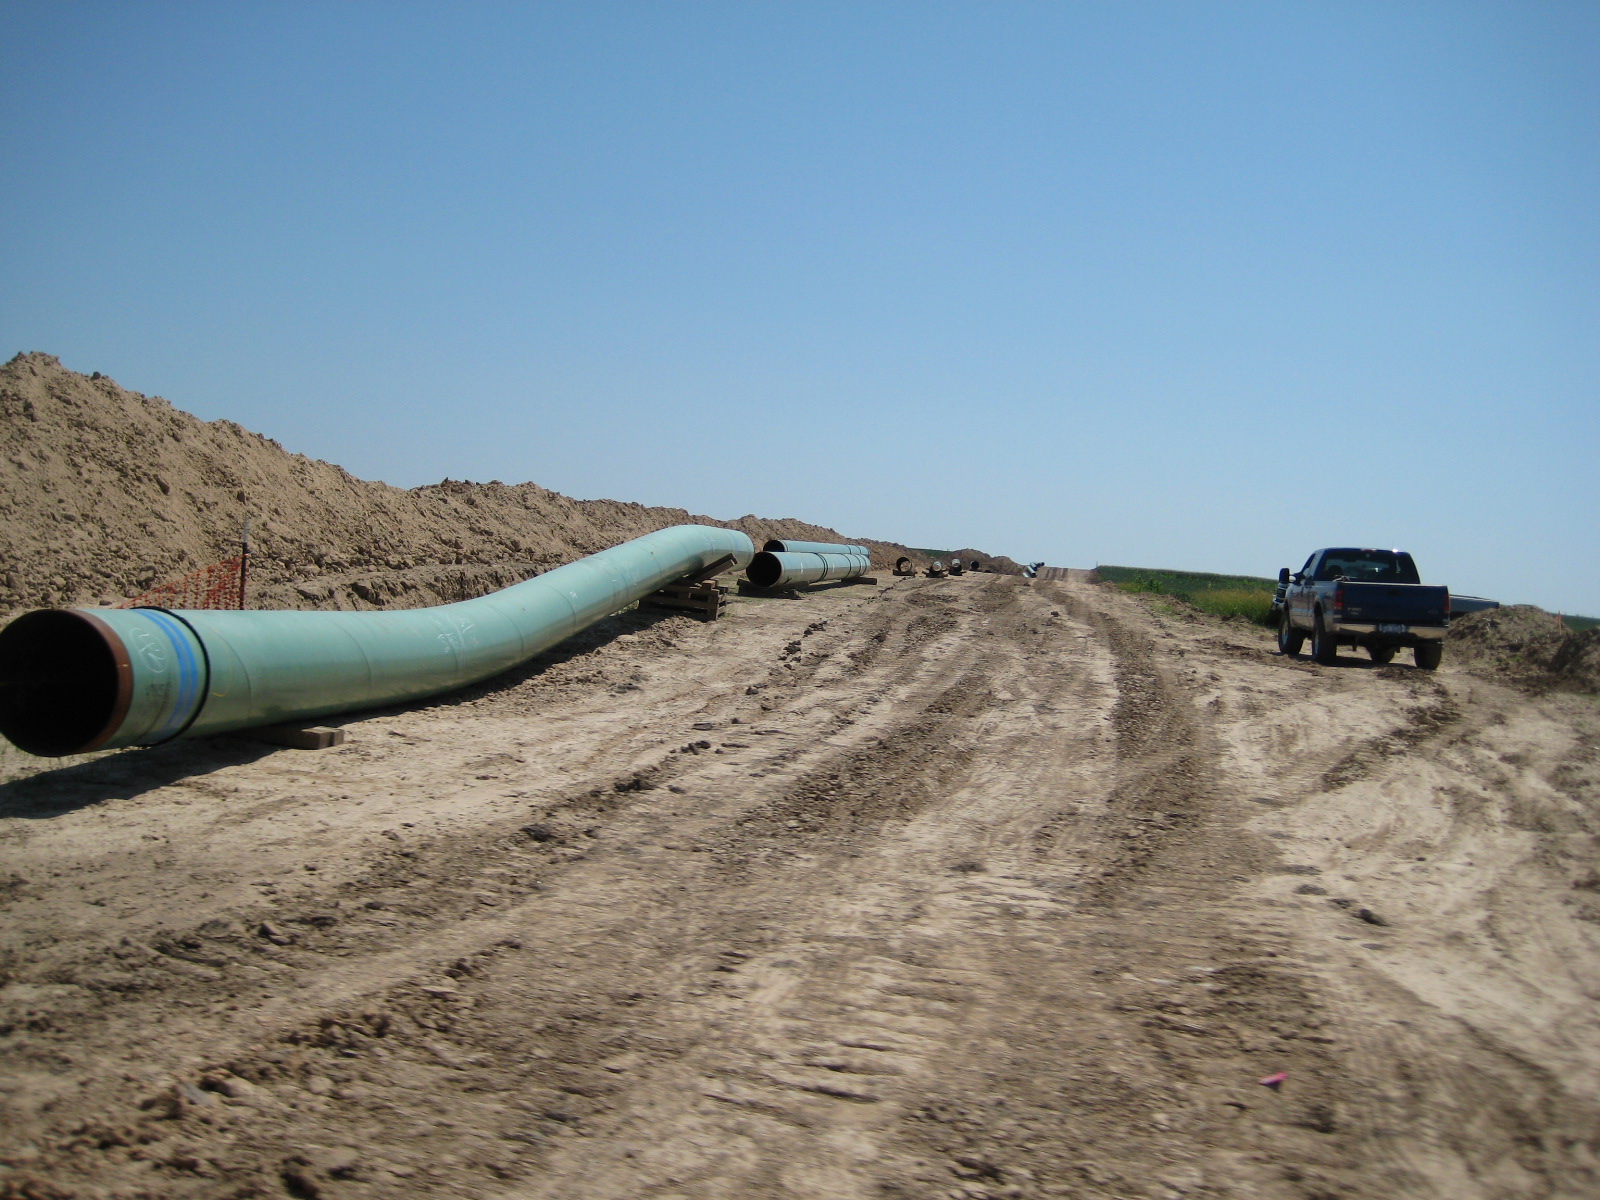 Pipes For Keystone Pipeline In 2009